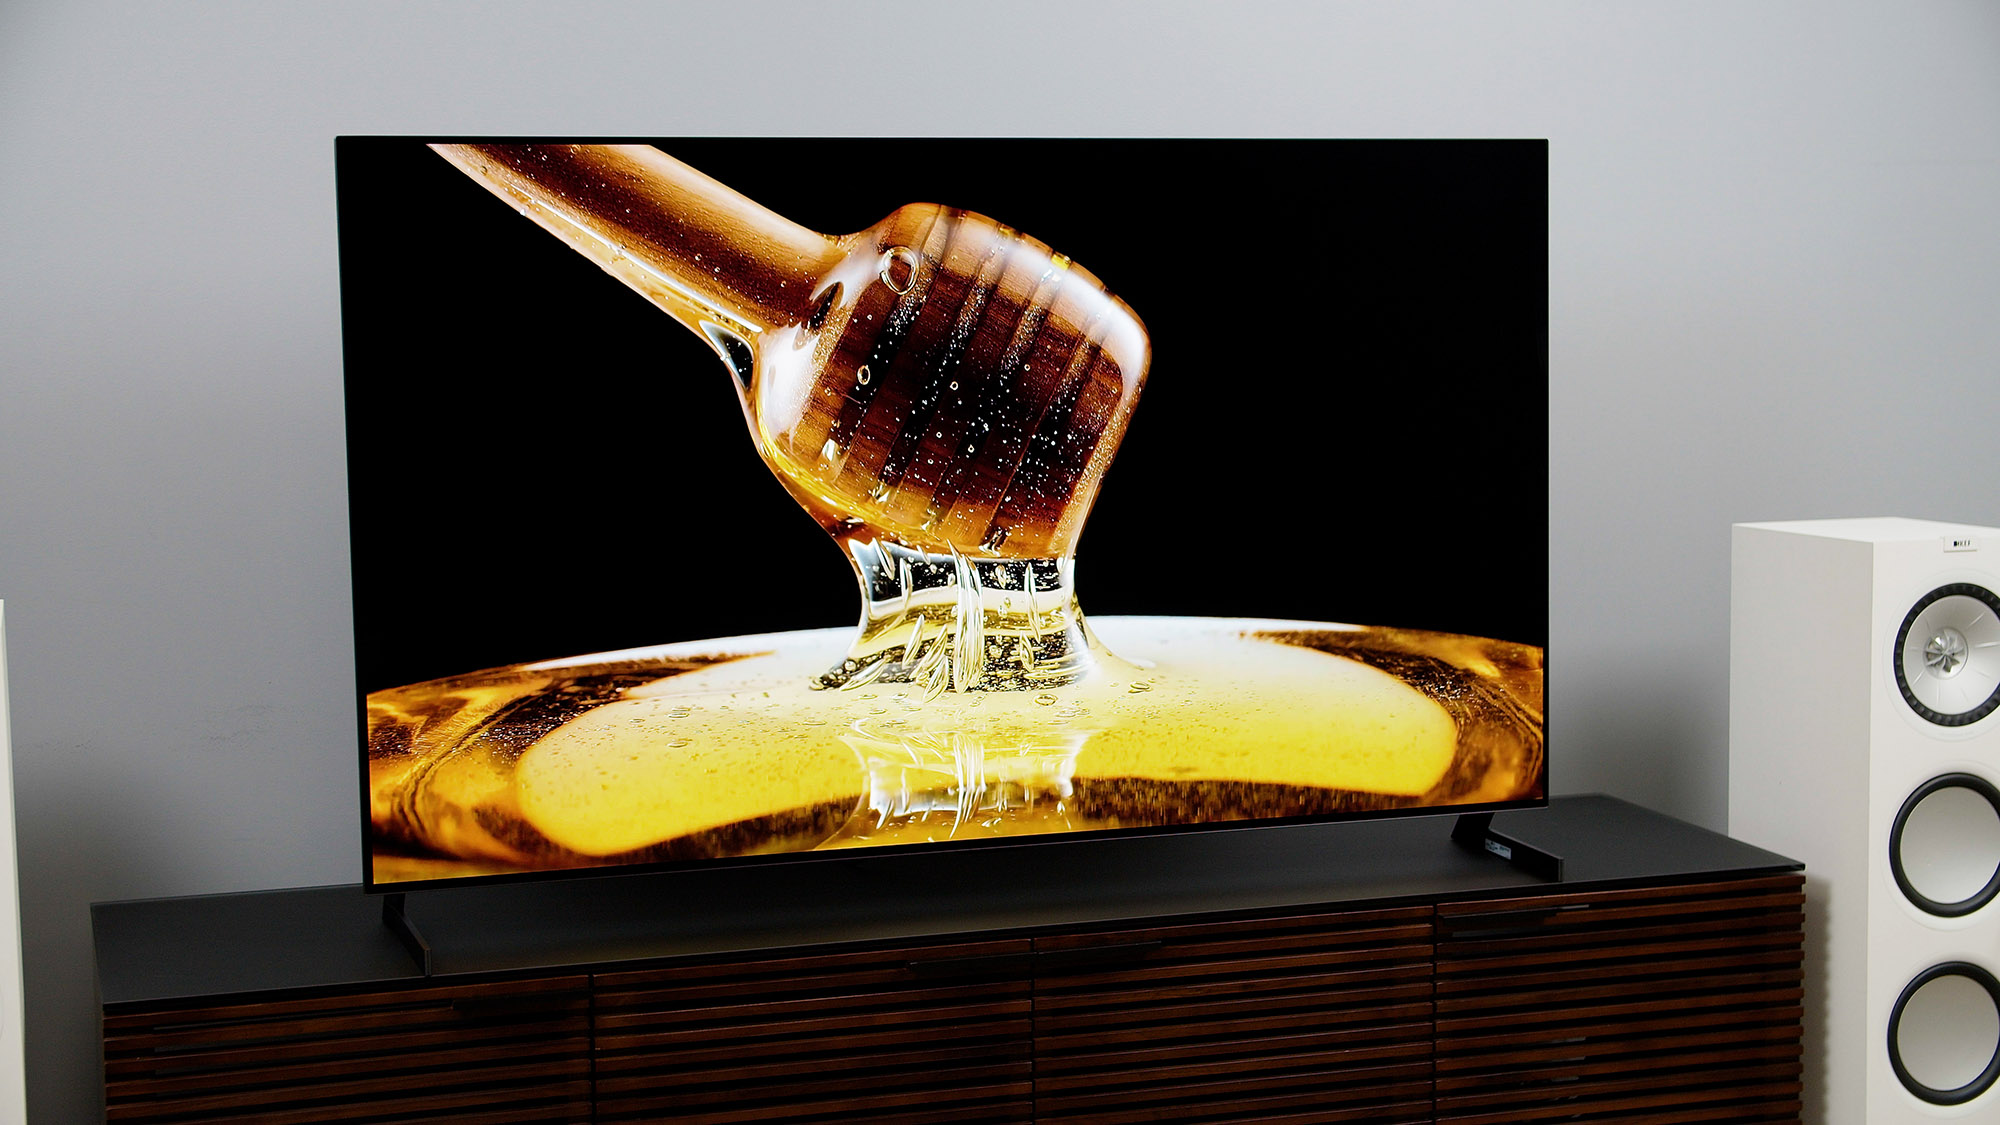 What Is OLED TV? The Ultra-Thin Display Tech Fully Explained